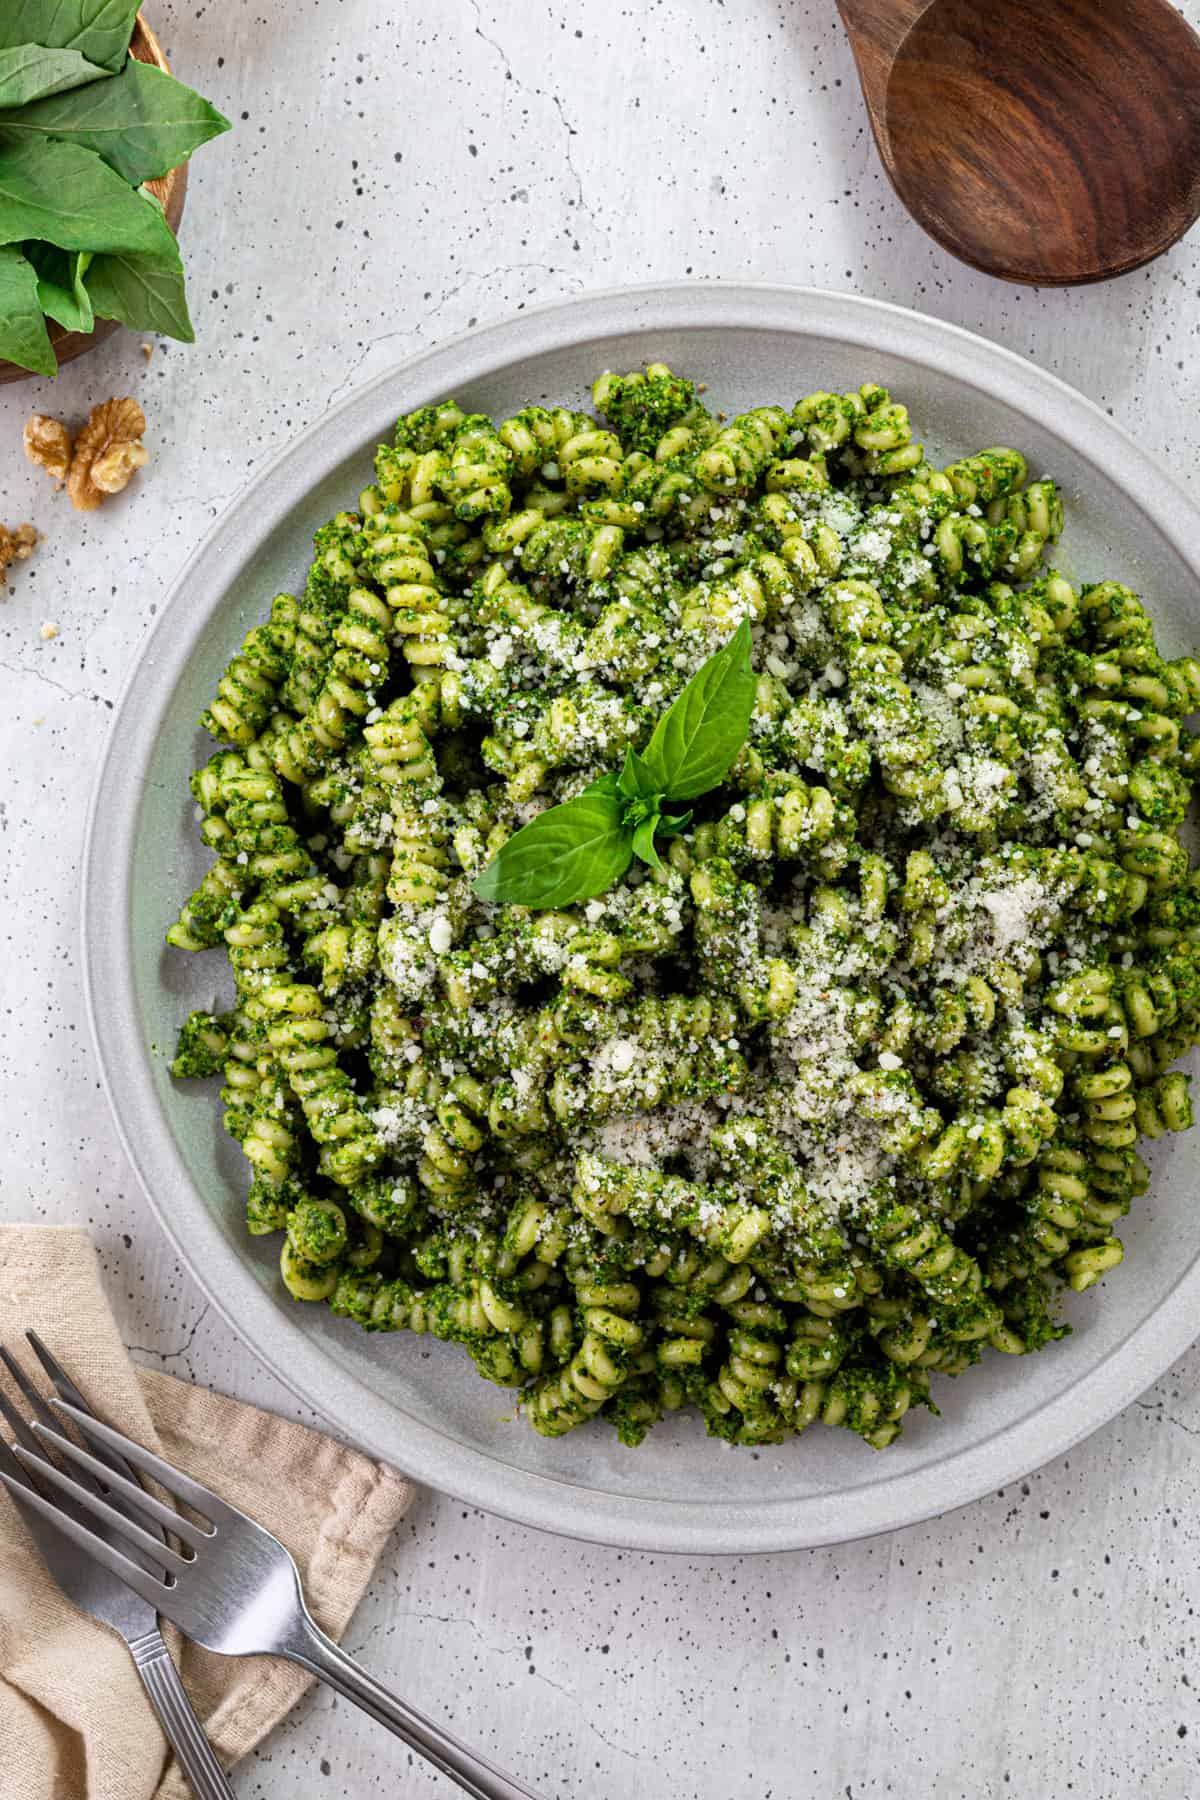 A plate of spinach pesto pasta with parmesan cheese and fresh basil.